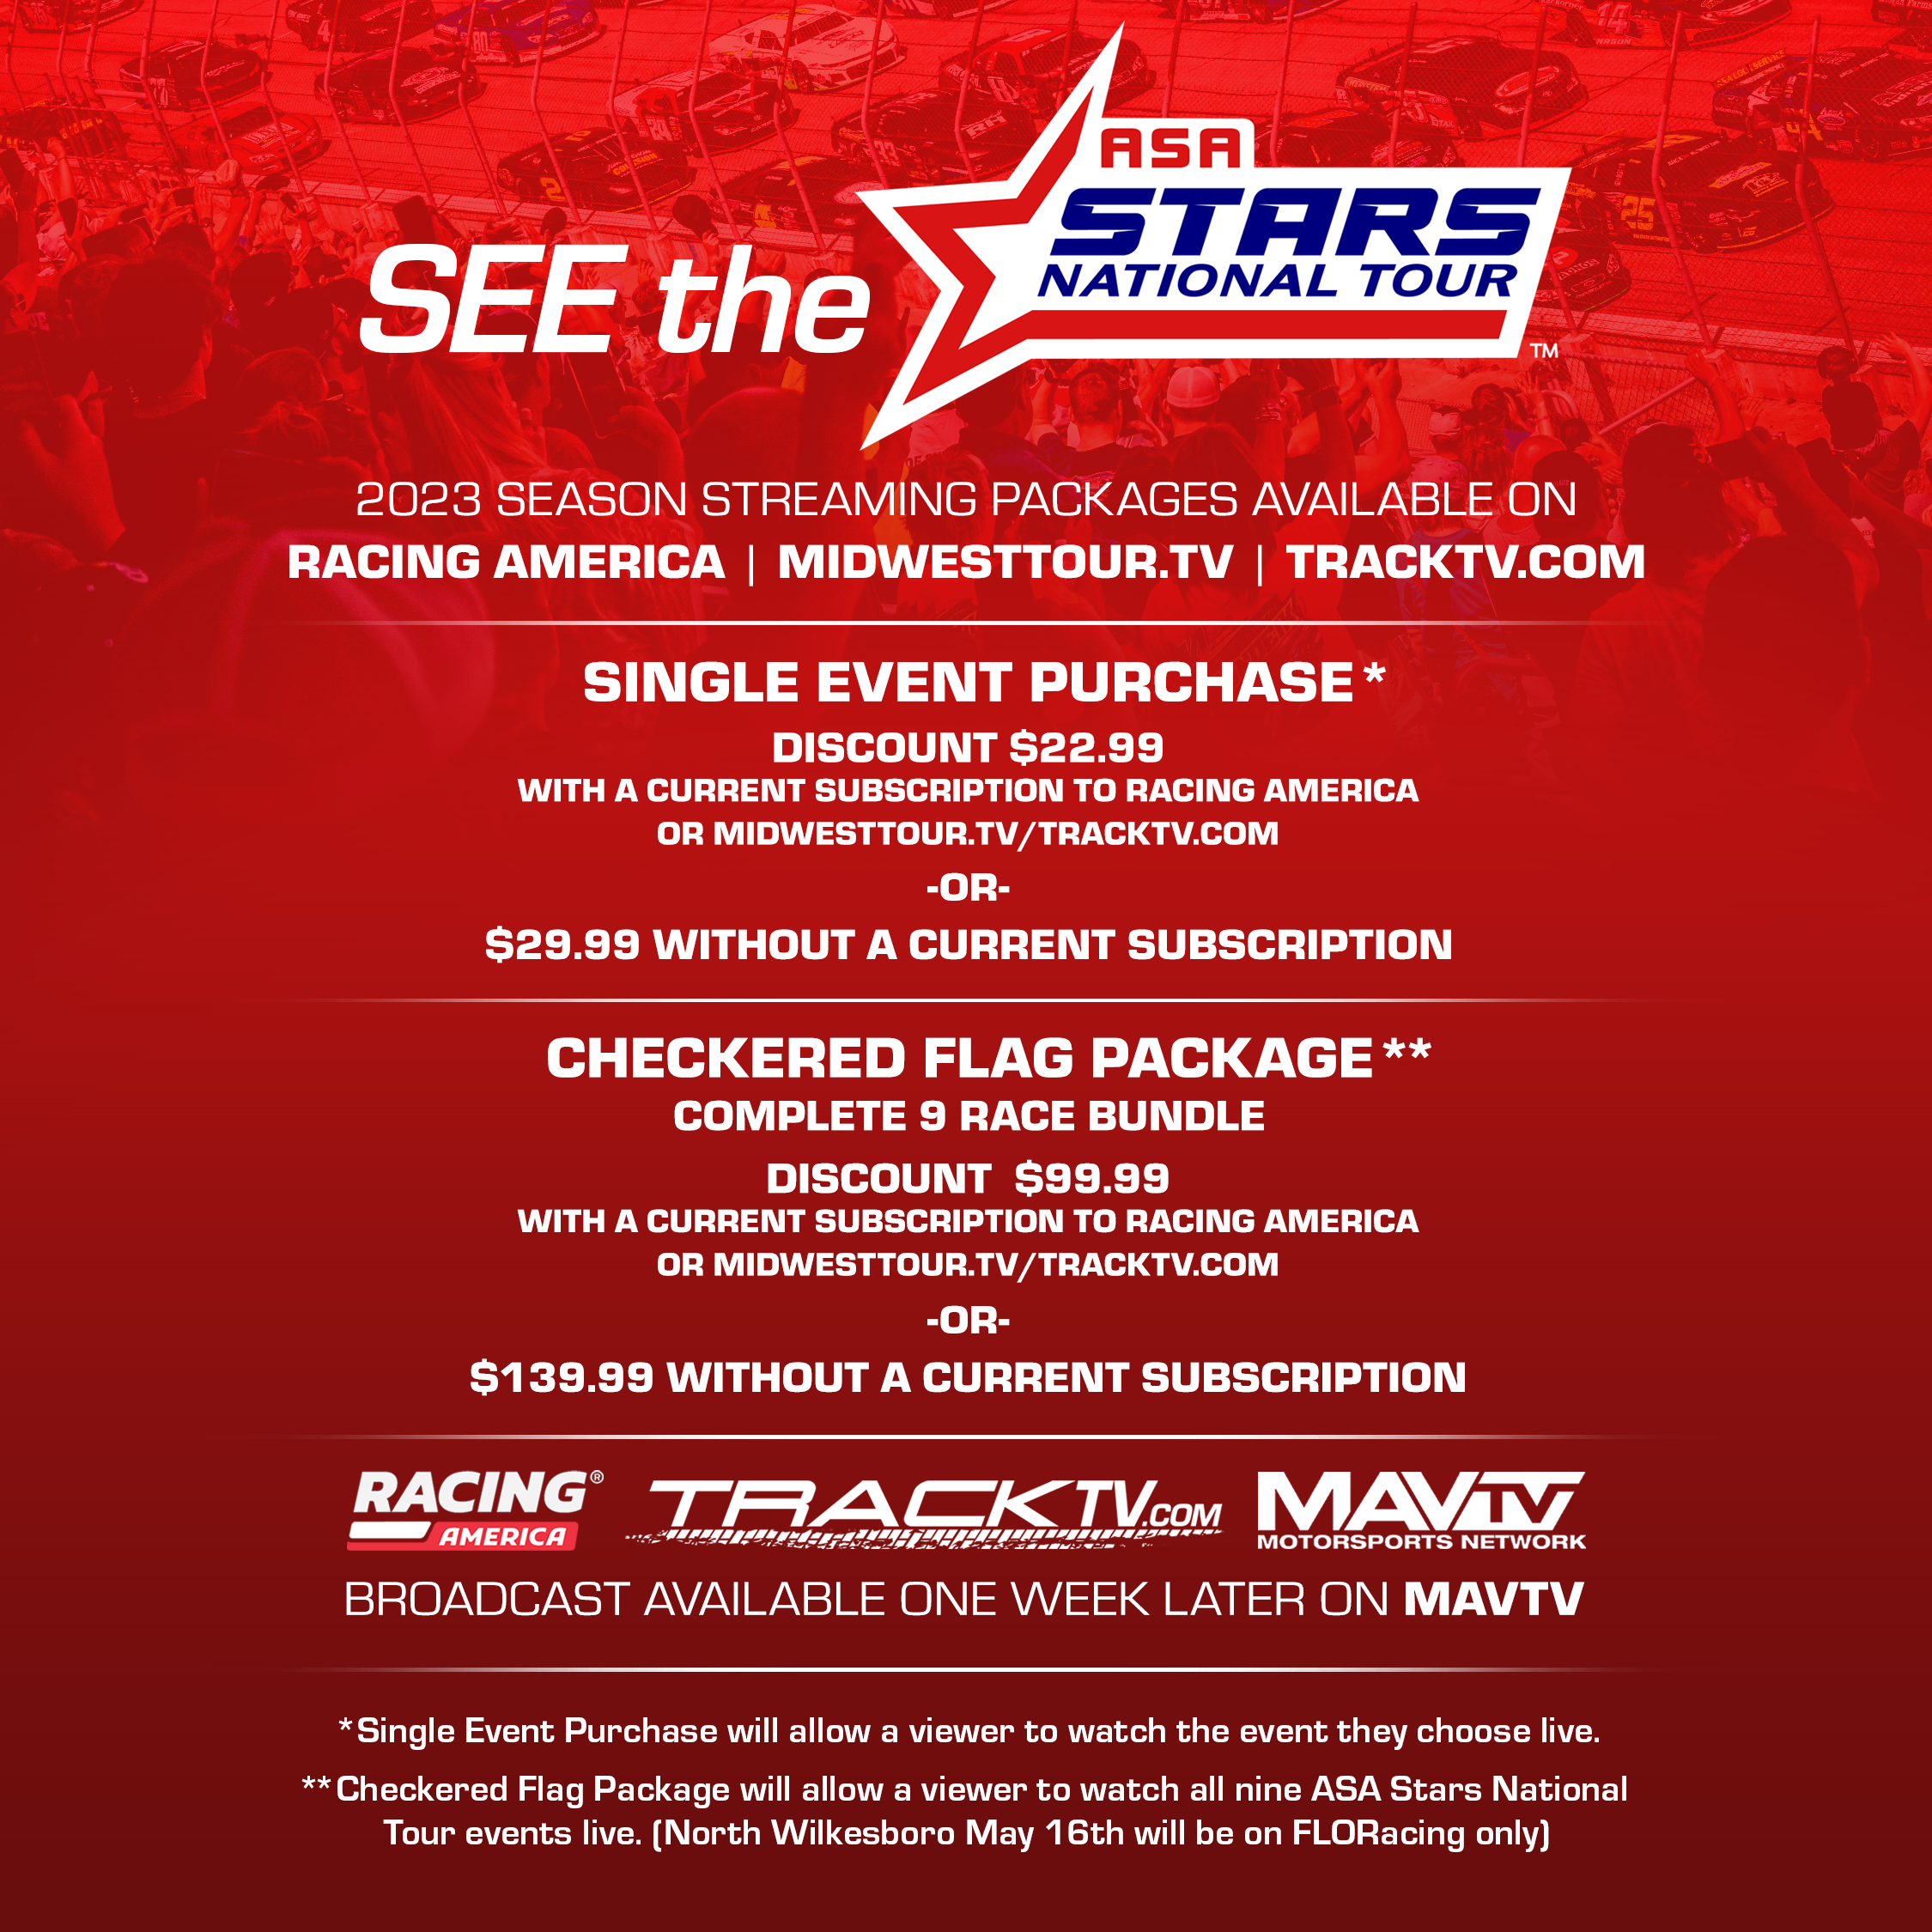 STAR GAZING How to watch the ASA STARS National Tour - Anderson, Indiana Speedway